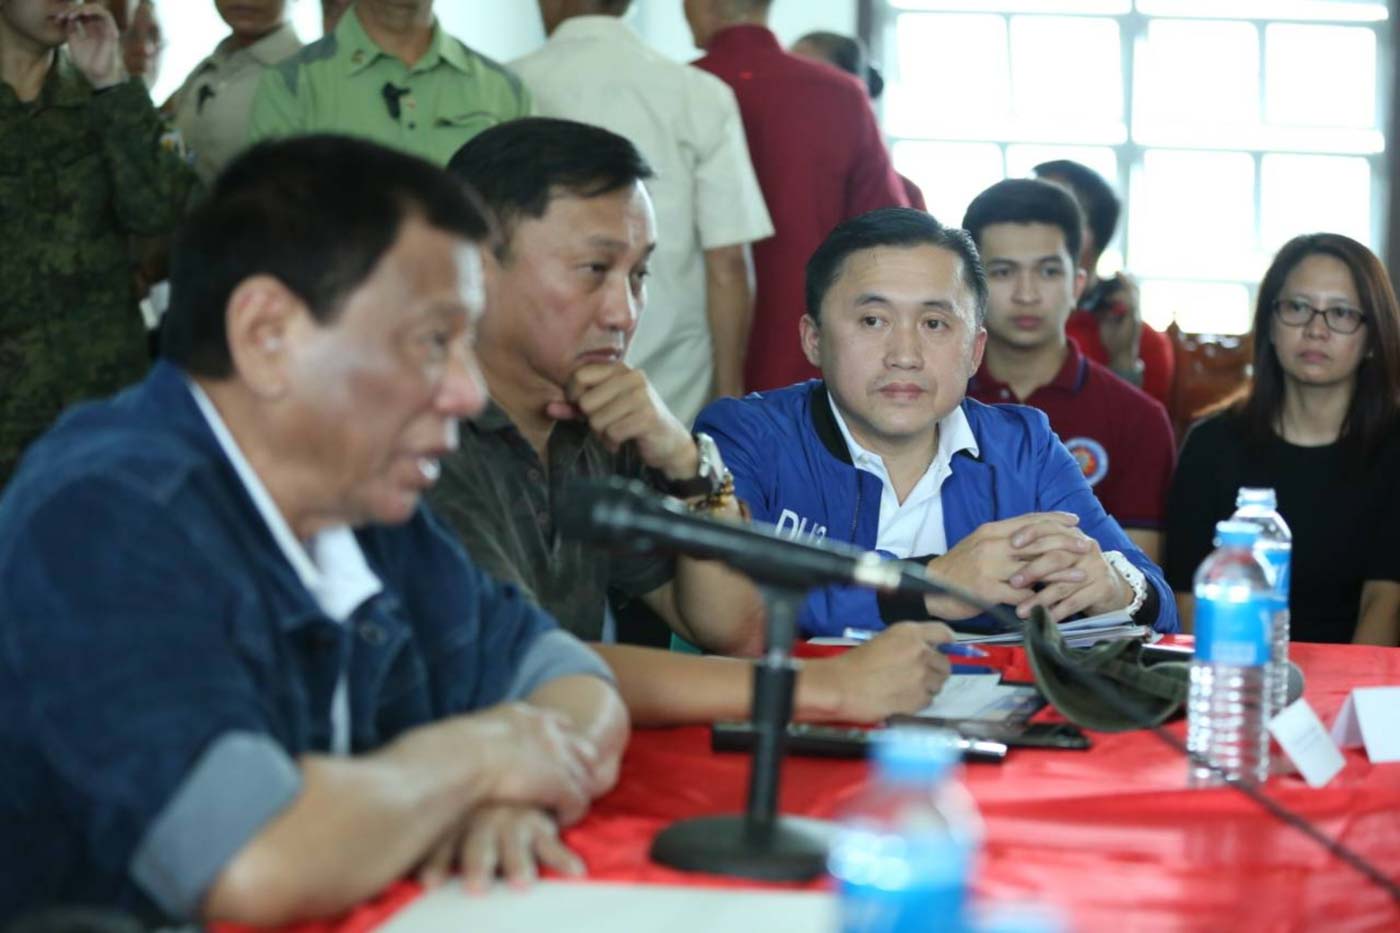 DUTERTE'S SUPPORT. Presidential Political Adviser Francis Tolentino sits beside President Rodrigo Duterte during a Typhoon Ompong situation briefing in Tuguegarao City, Cagayan. Malacañang photo 